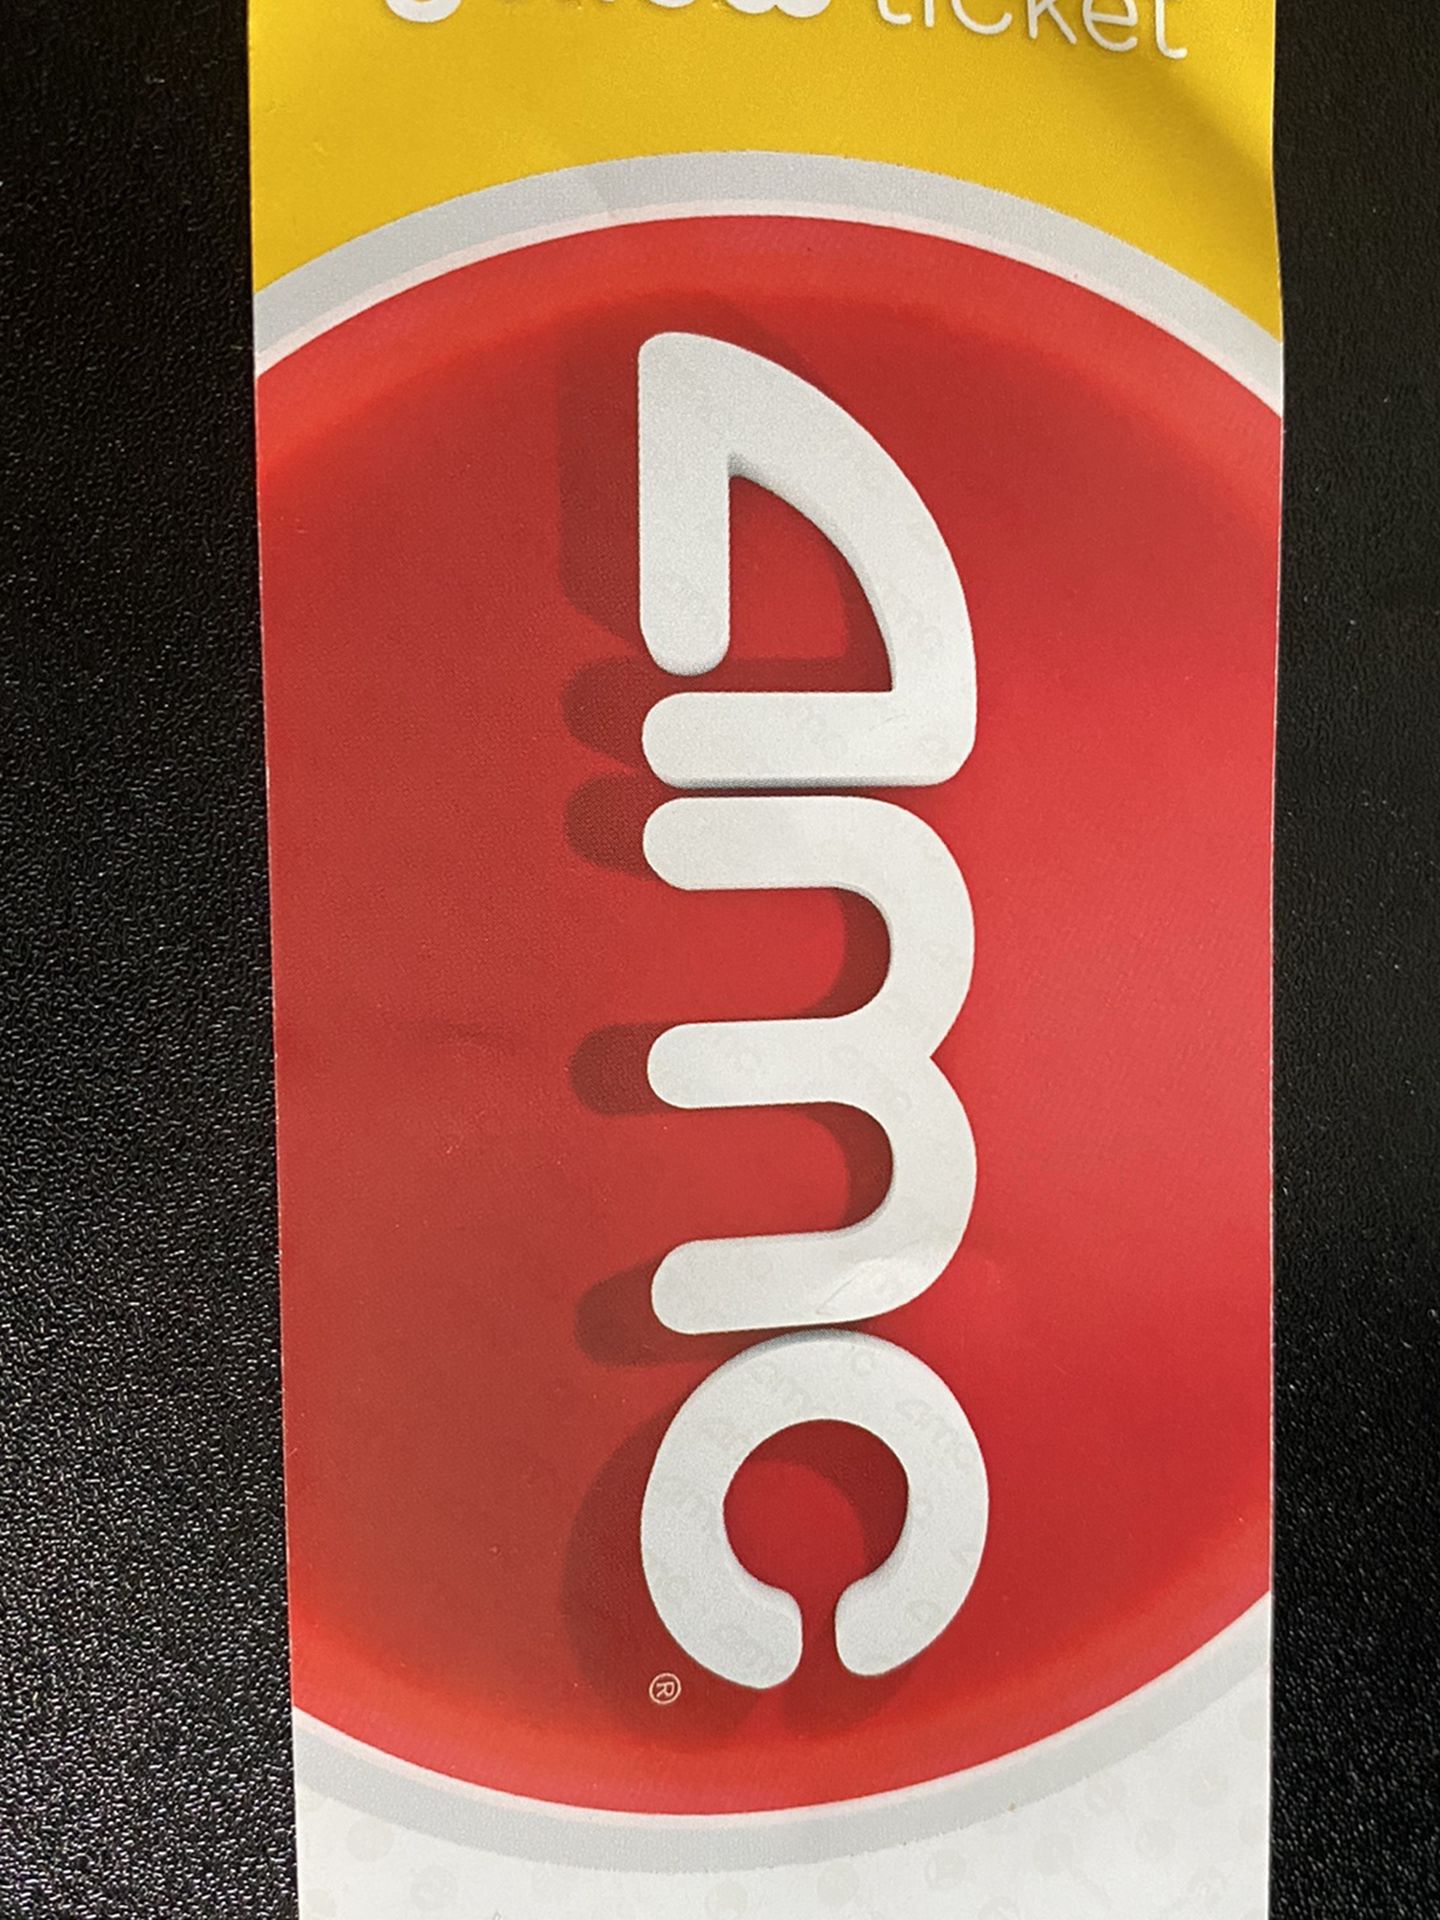 AMC Movie Ticket 1 For $6 or 2 For $10